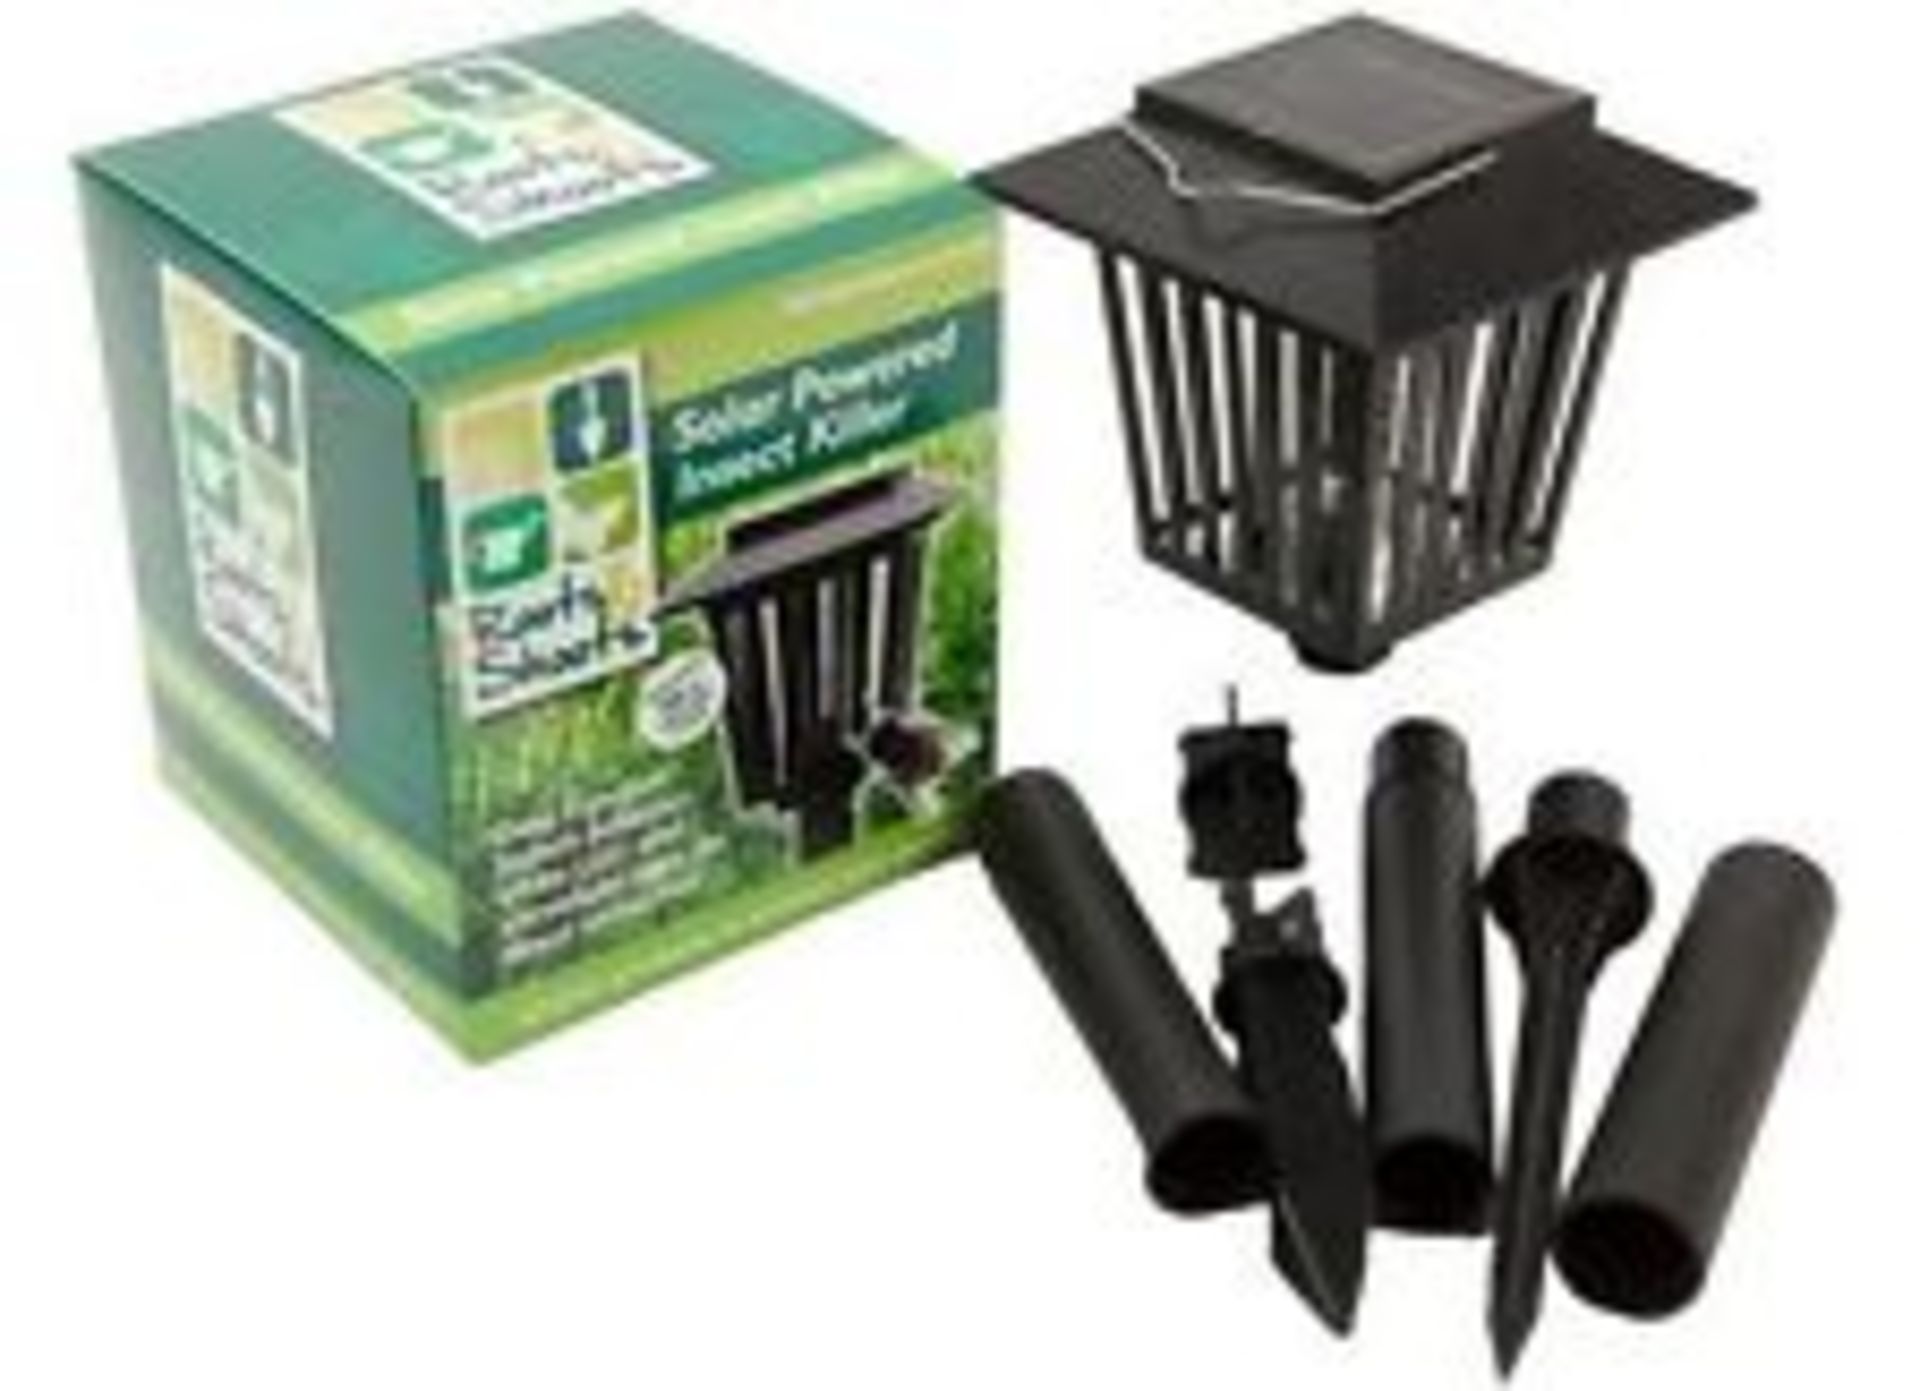 V Grade A 6" Diameter High Powered Lantern Insect Killer X 2 YOUR BID PRICE TO BE MULTIPLIED BY TWO